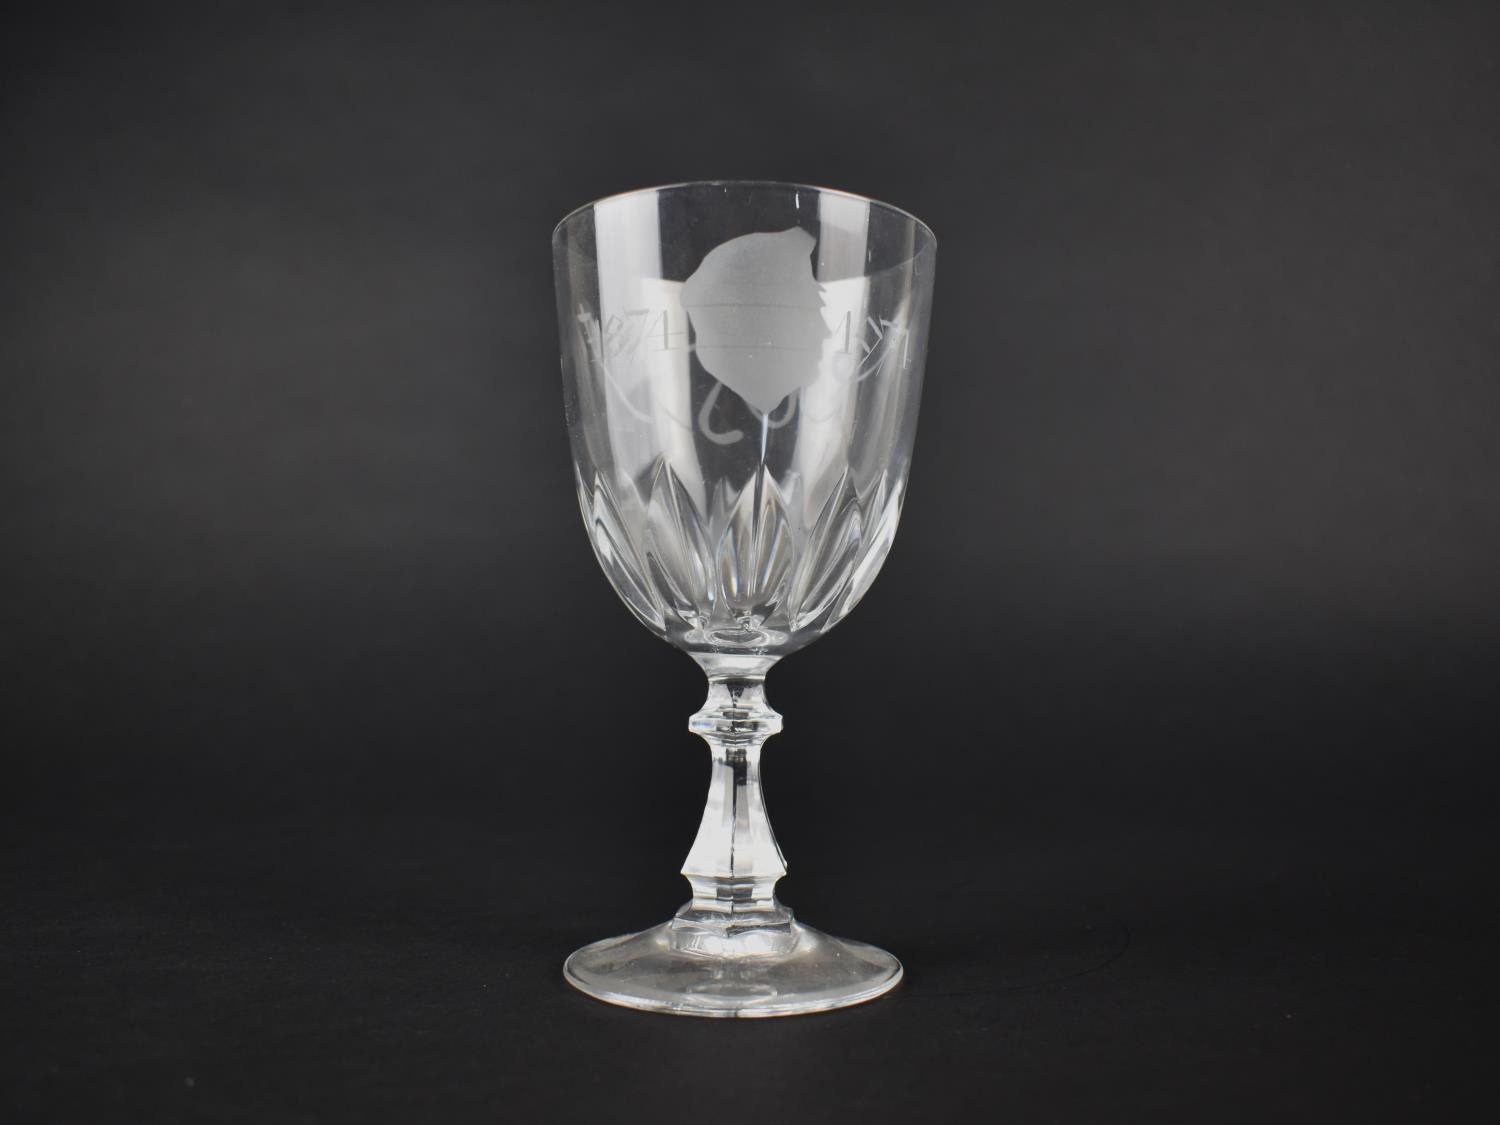 Two Limited Hand Engraved Glasses for The Churchill Centenary - 1874-1974, Together with a 1939-1945 - Image 2 of 5